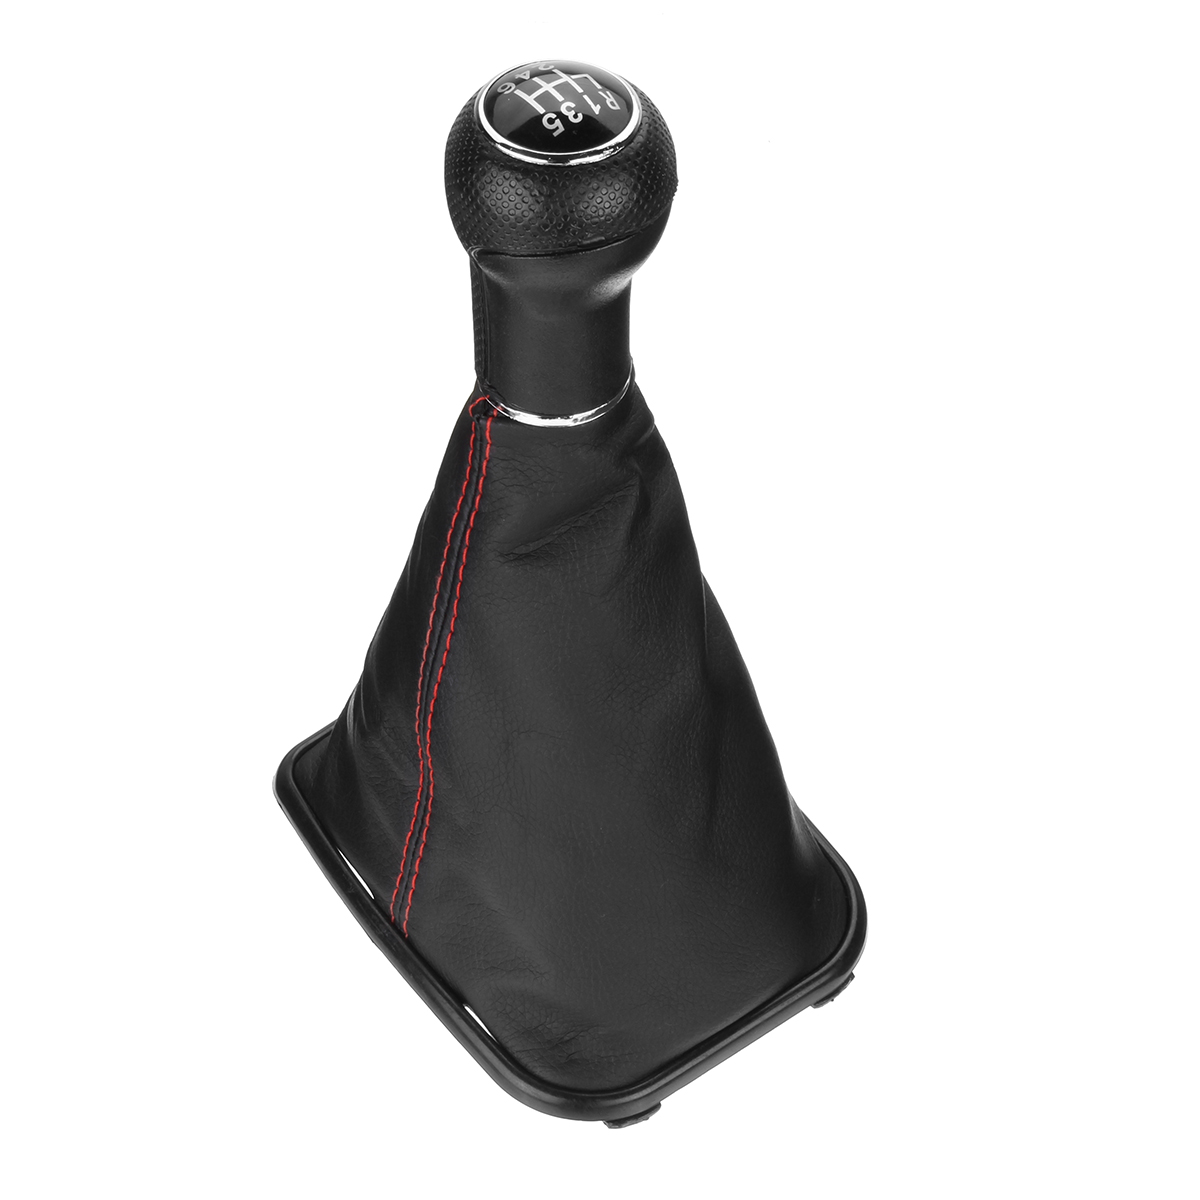 5/6 Speed Gear Shift Knob with Gaitor Boot Dust Cover PU Leather for VW Golf 4 Bora - Auto GoShop